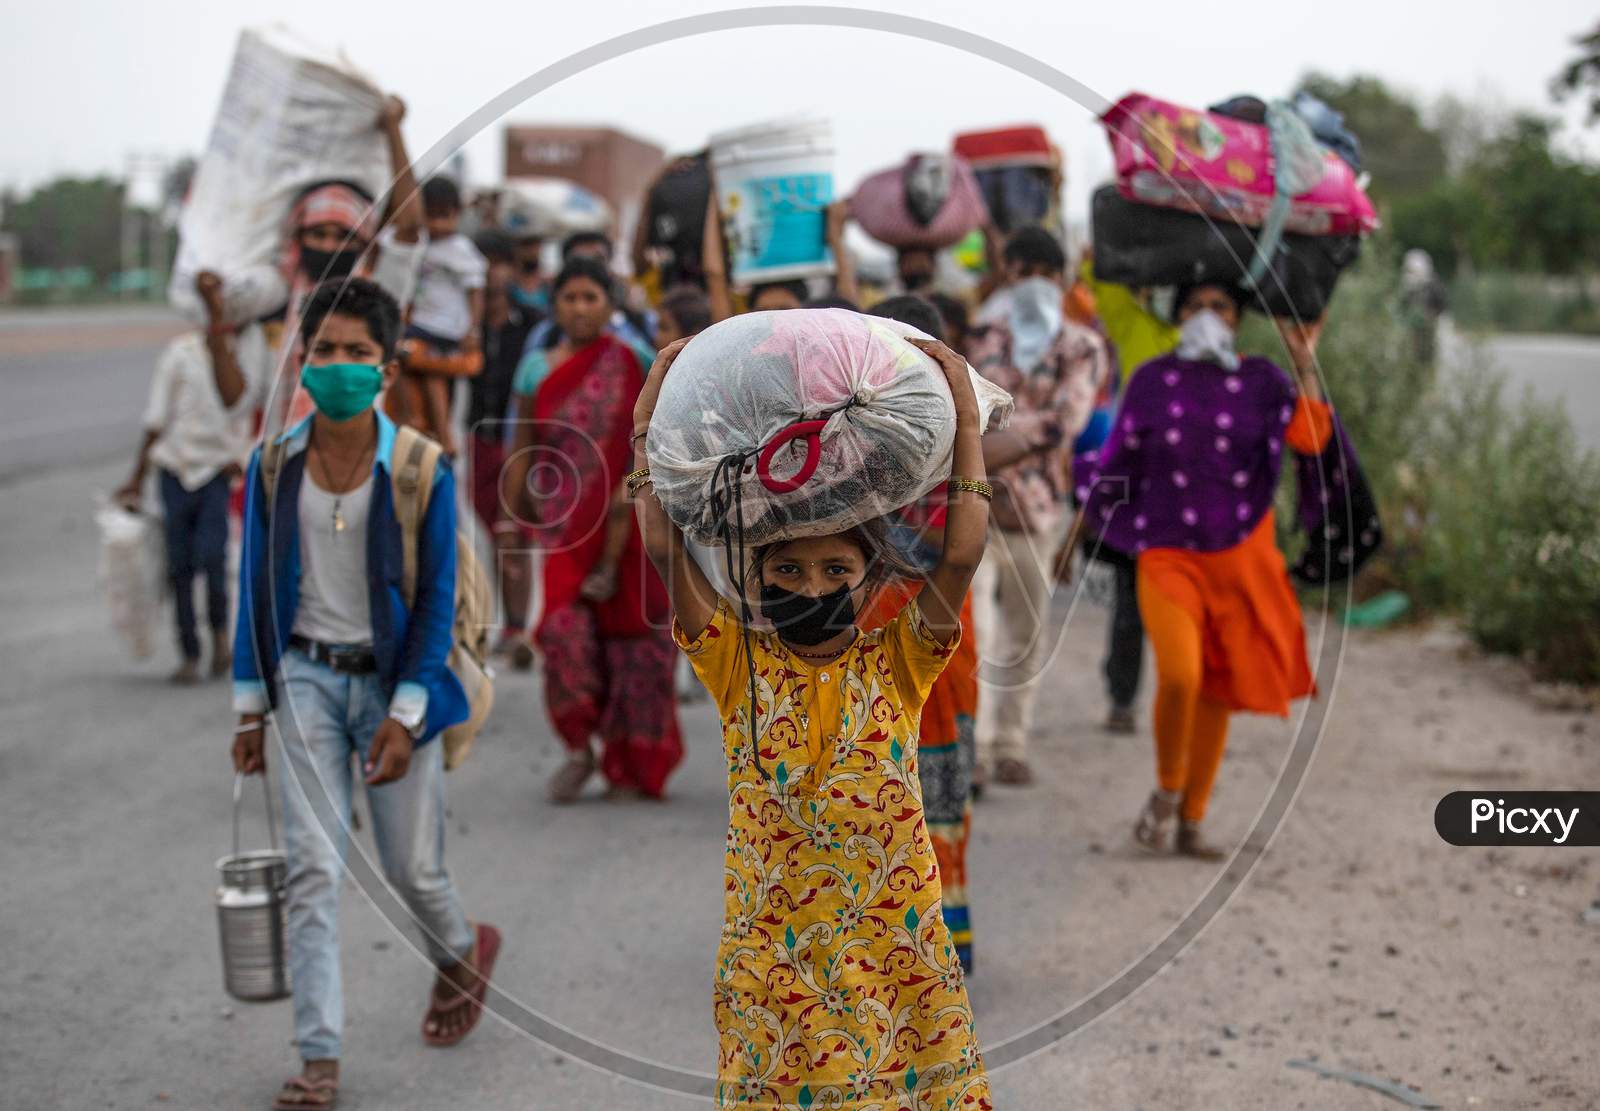 Sapna, 8, A Daughter Of Migrant Worker, Walks Along A Highway With Her Family To Return To Their Village In Purnia District Of Bihar During An Extended Nationwide Lockdown To Slow The Spread Of The Coronavirus Disease, In Sonipat, Haryana On May 19,2020.